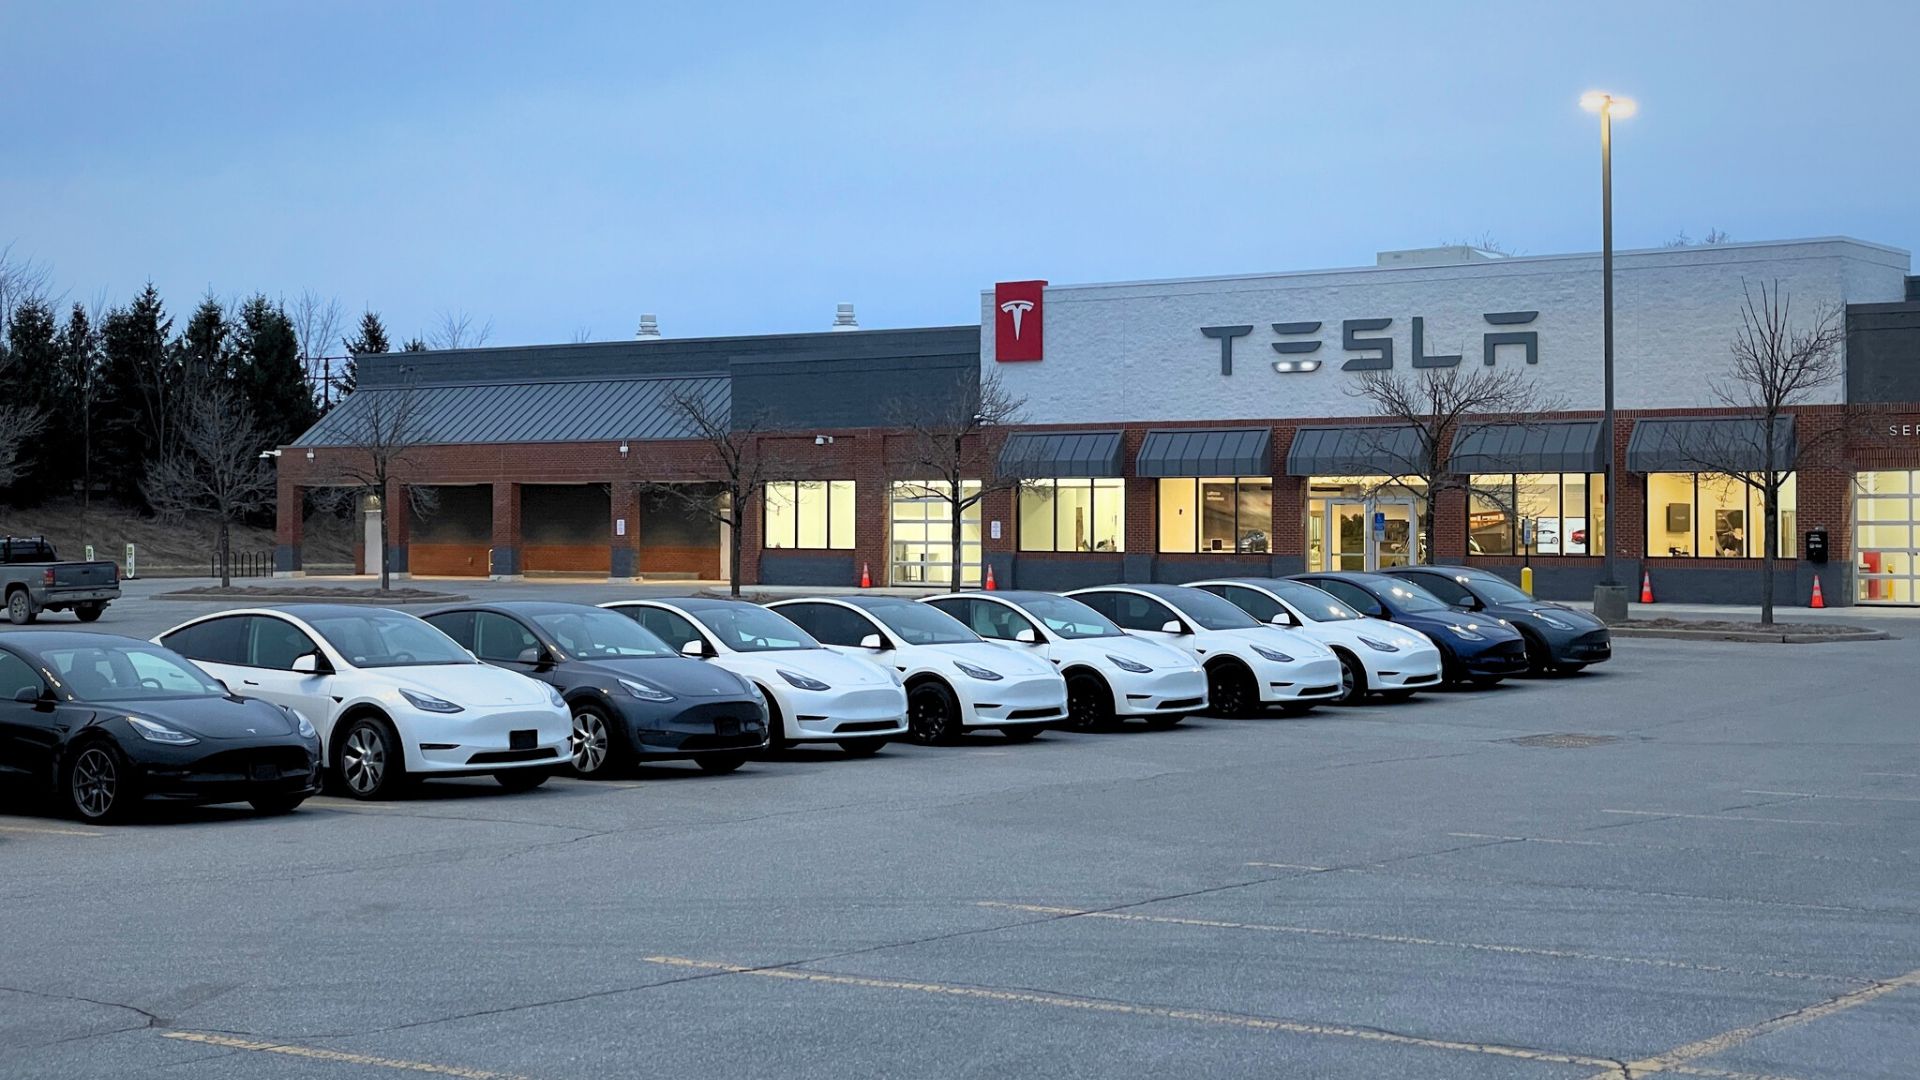  Tesla opens first Vermont store in South Burlington, featuring Cybertruck 